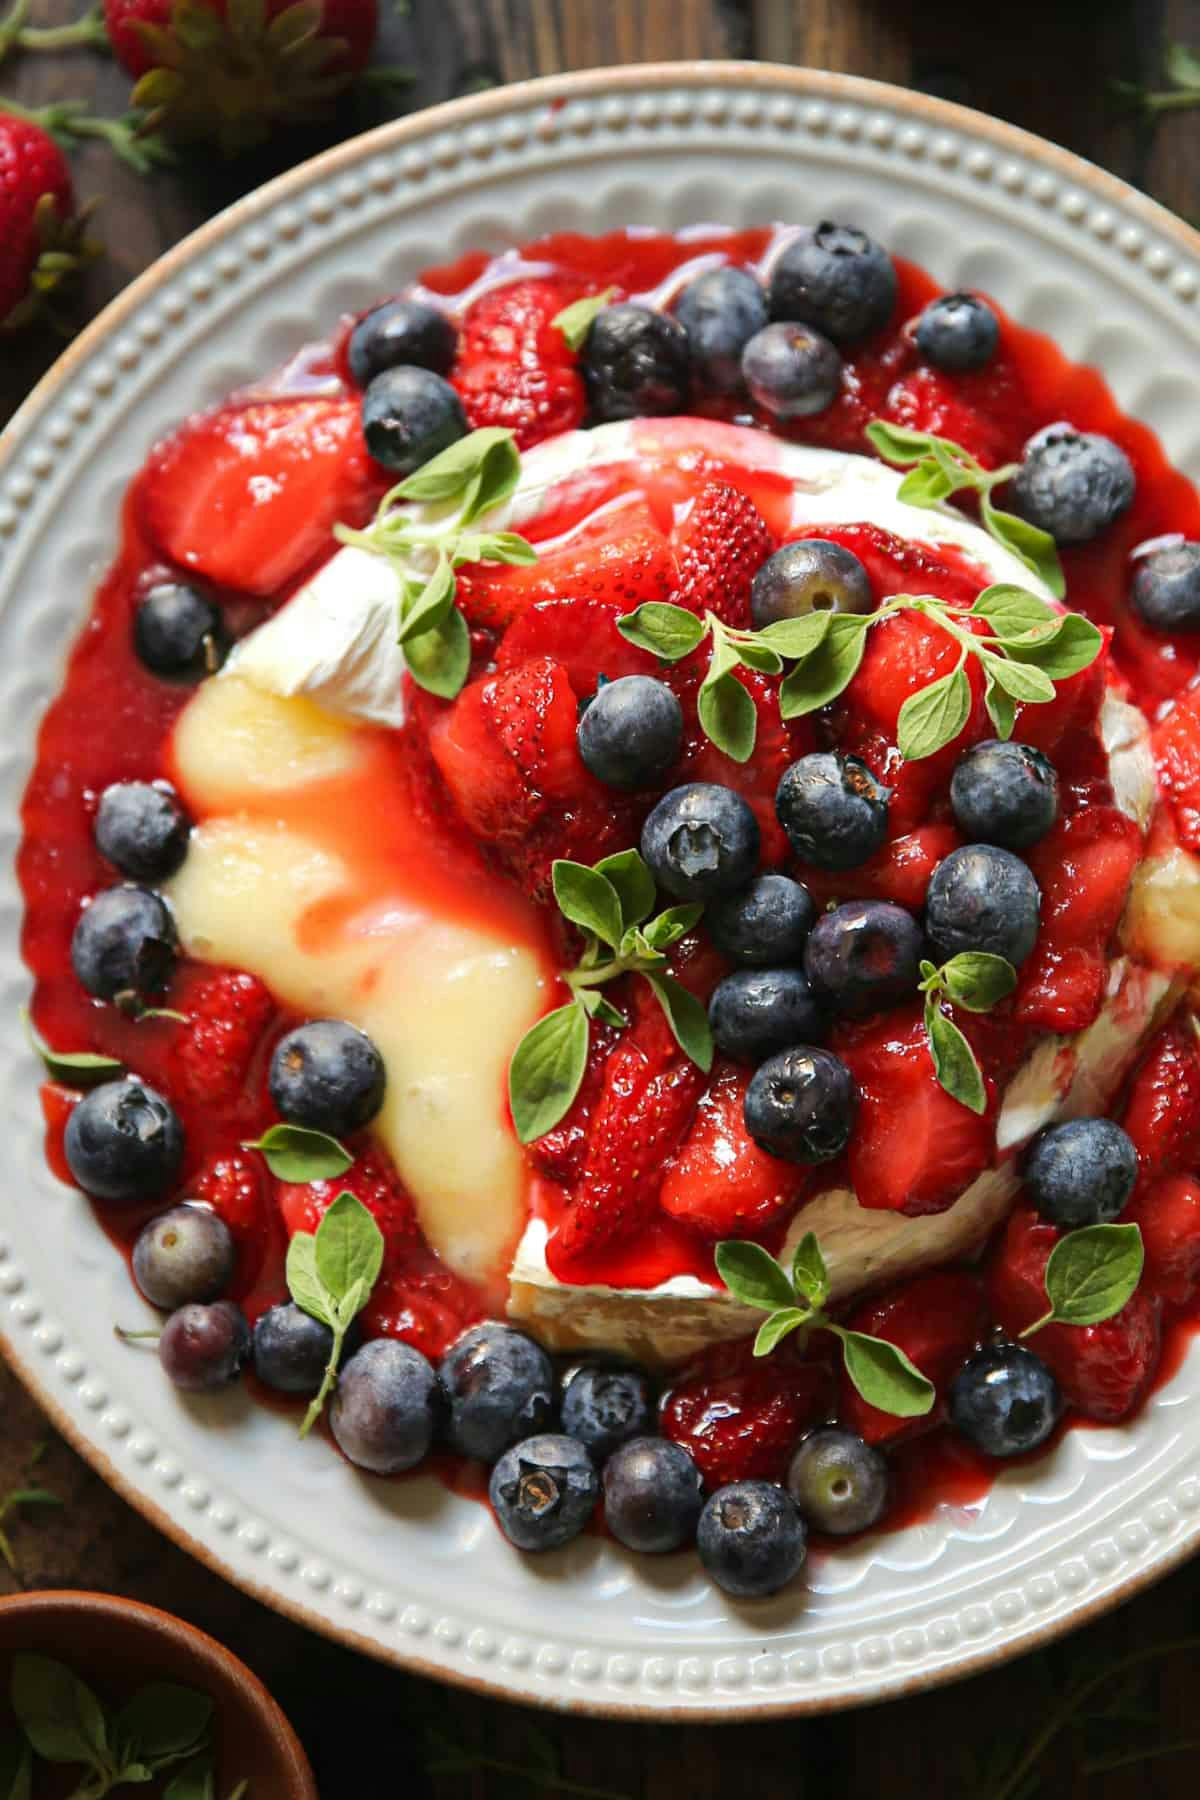 Baked Brie with Honey-Lemon Strawberries and Blueberries